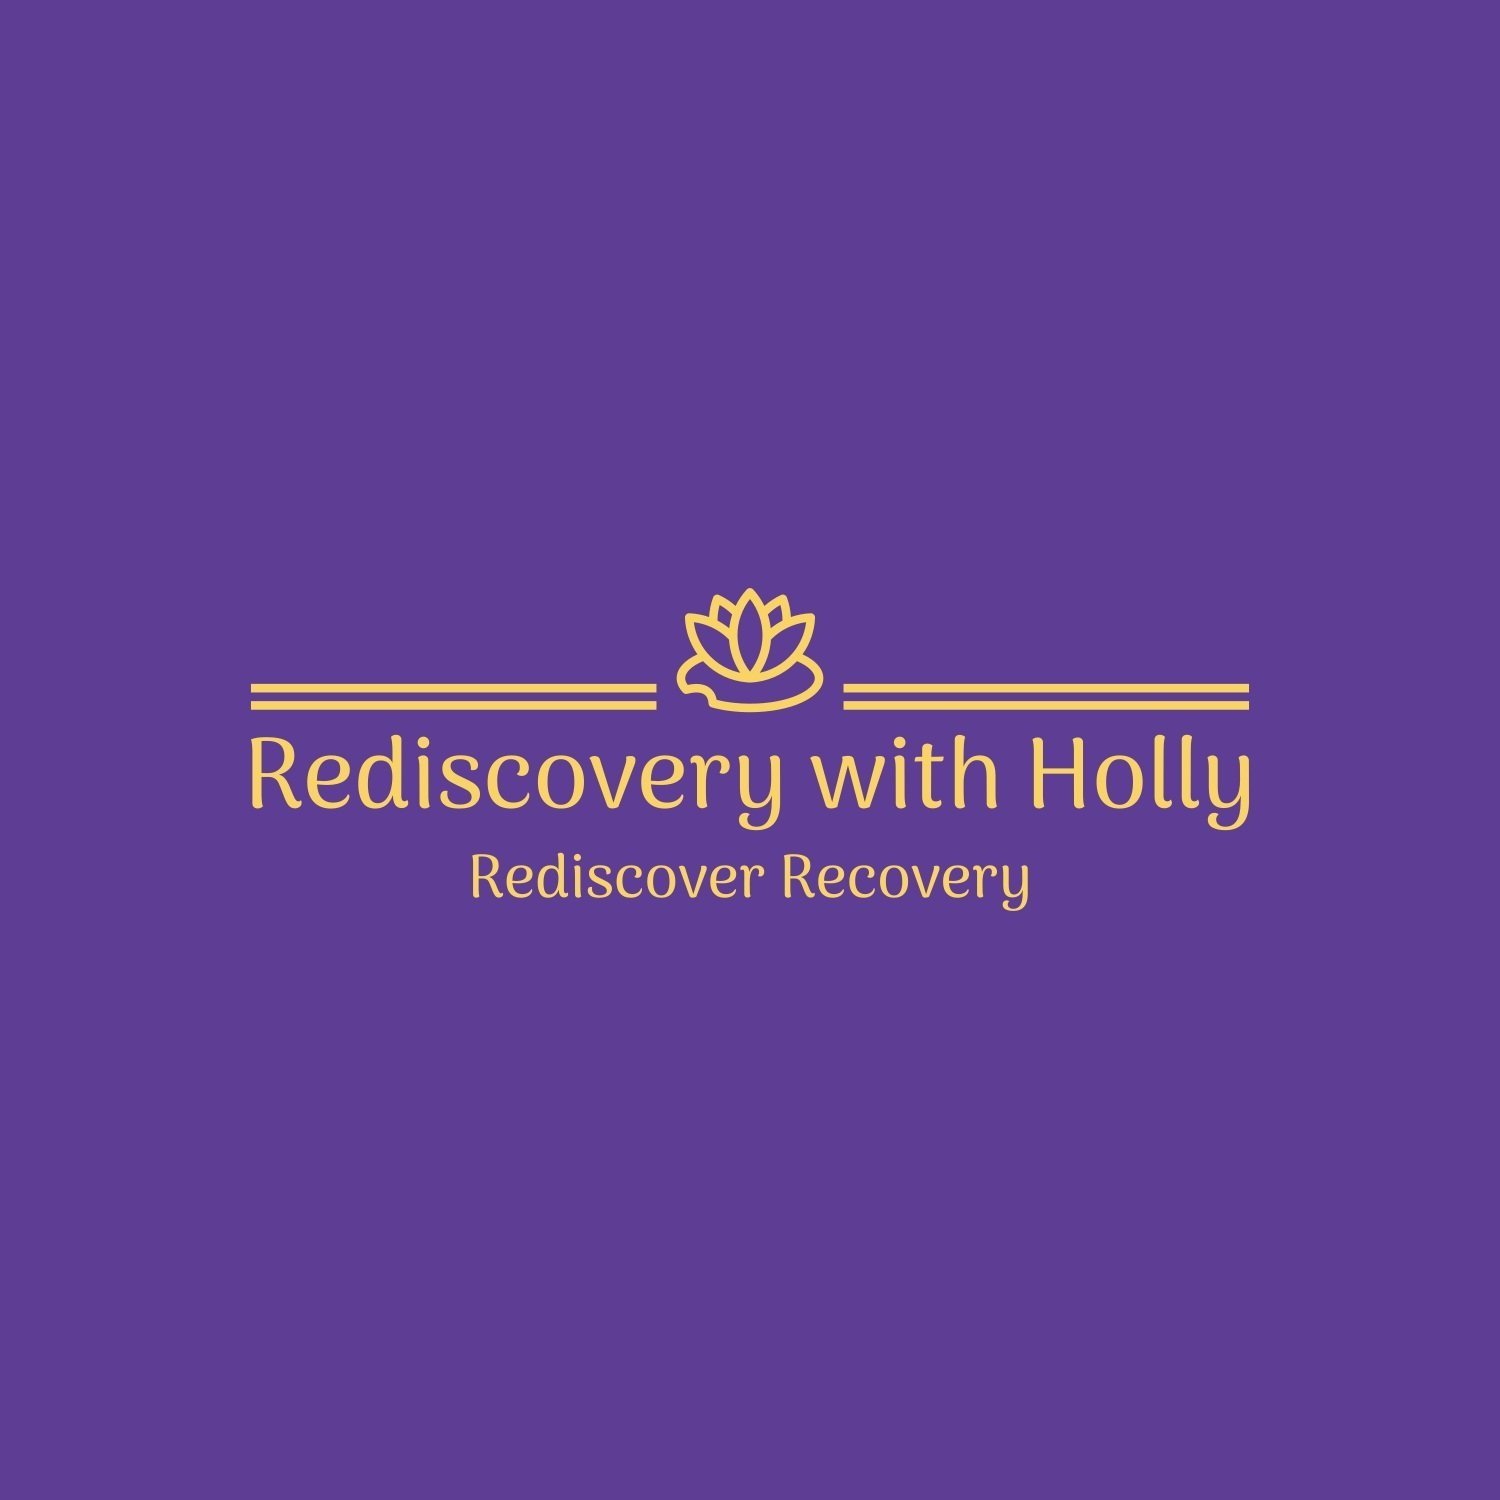 Rediscovery with Holly